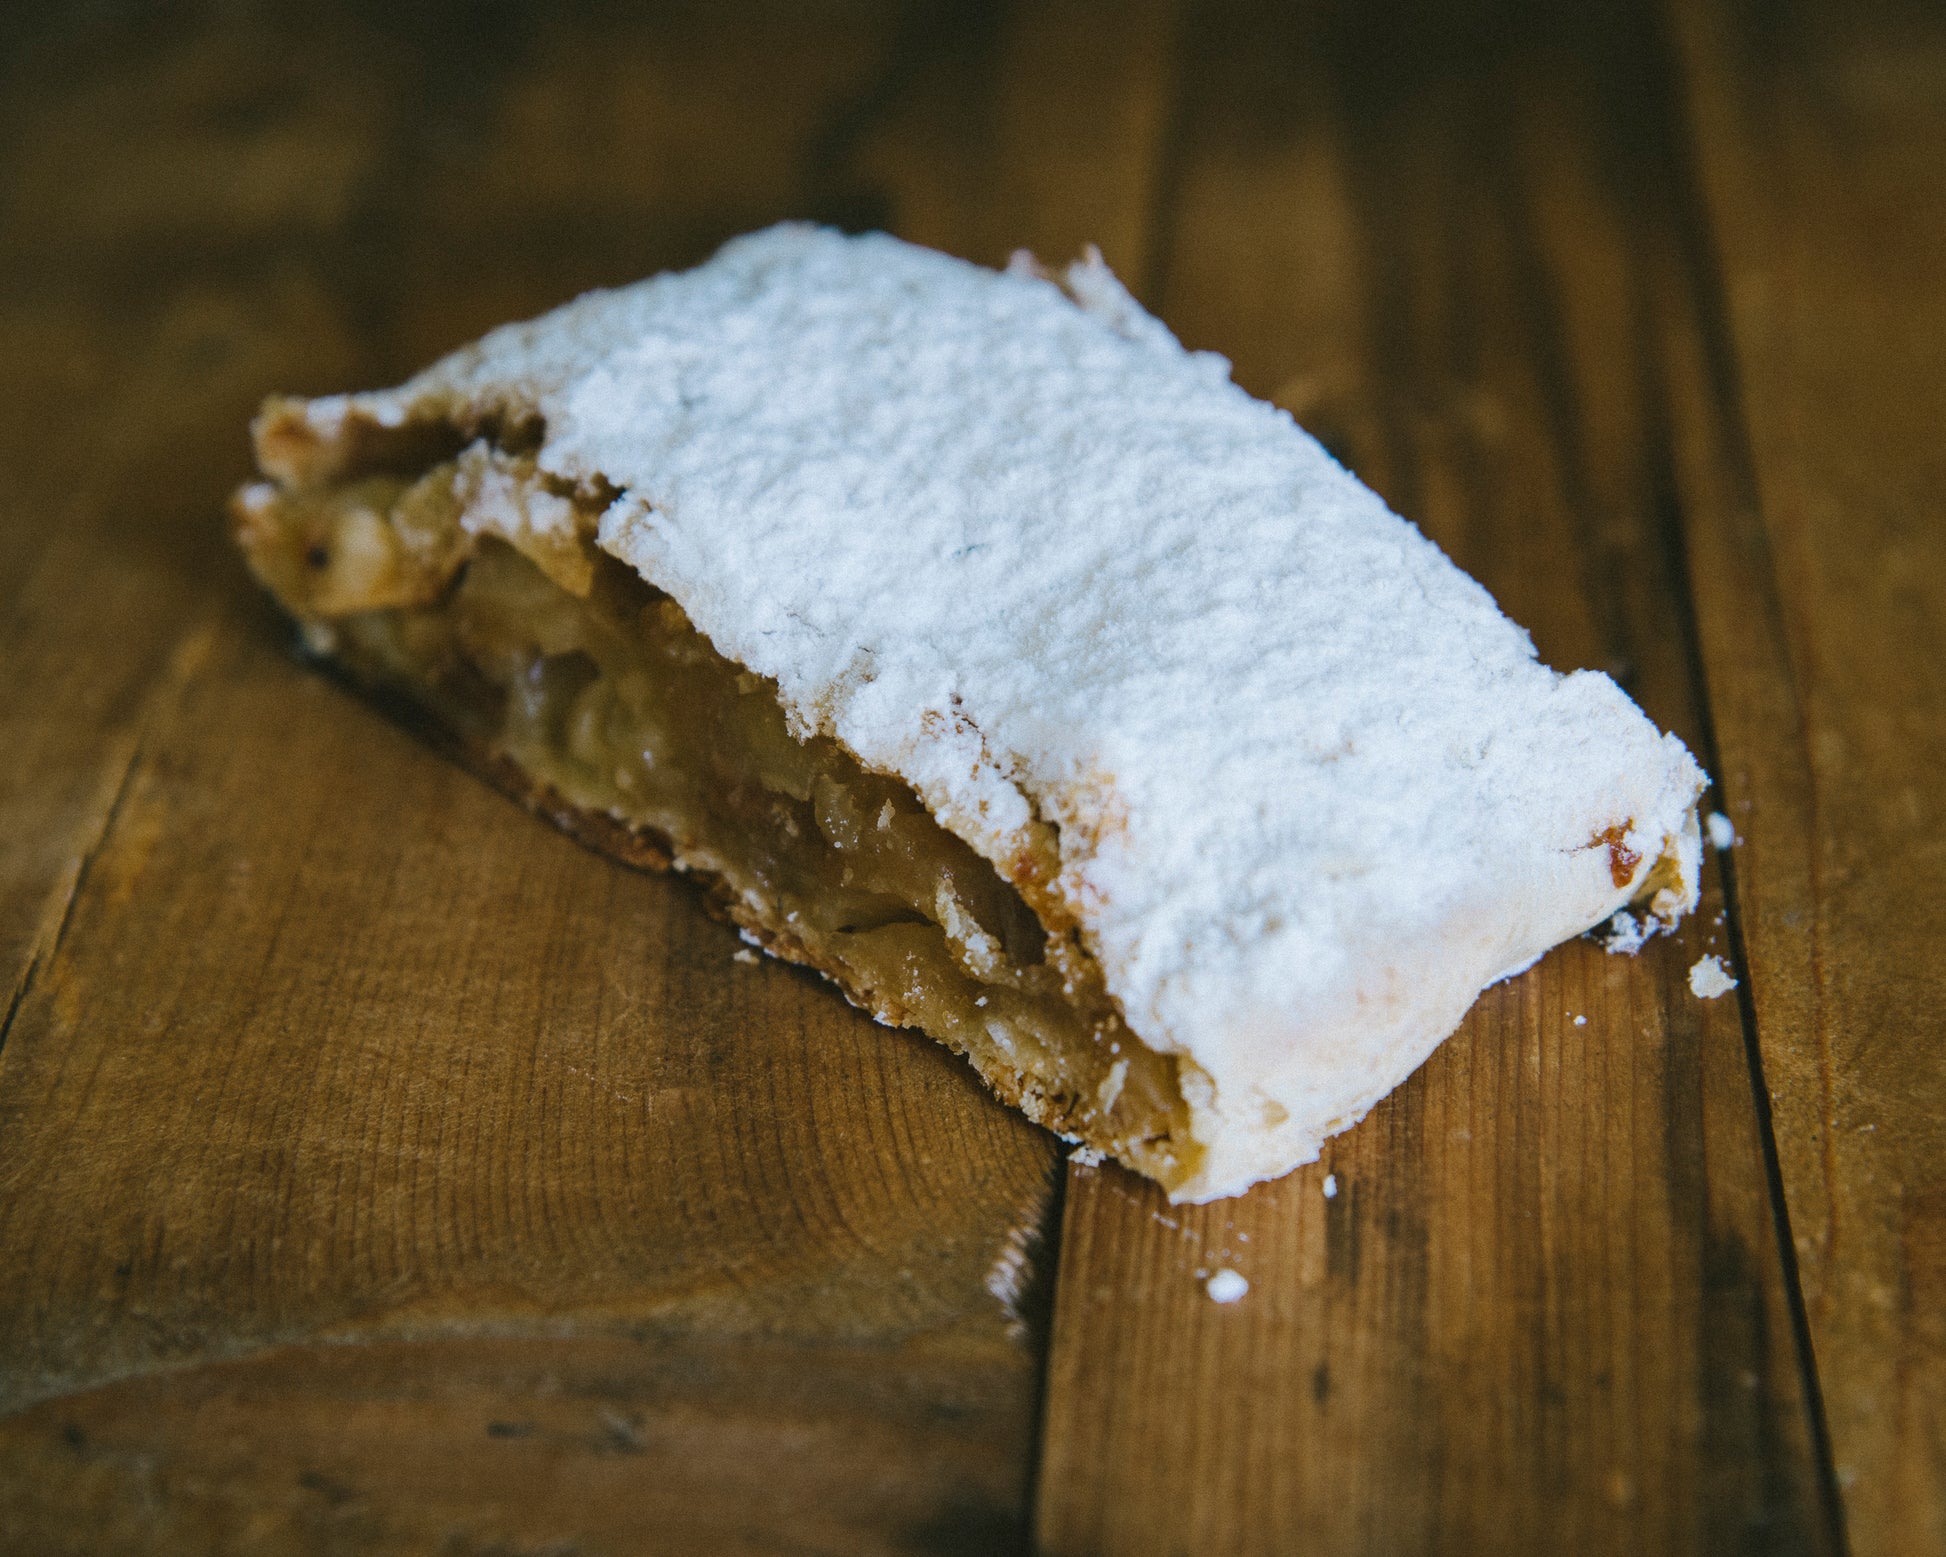 Apples, raisins with a touch of rum wrapped in flaky pastry and dusted with icing sugar